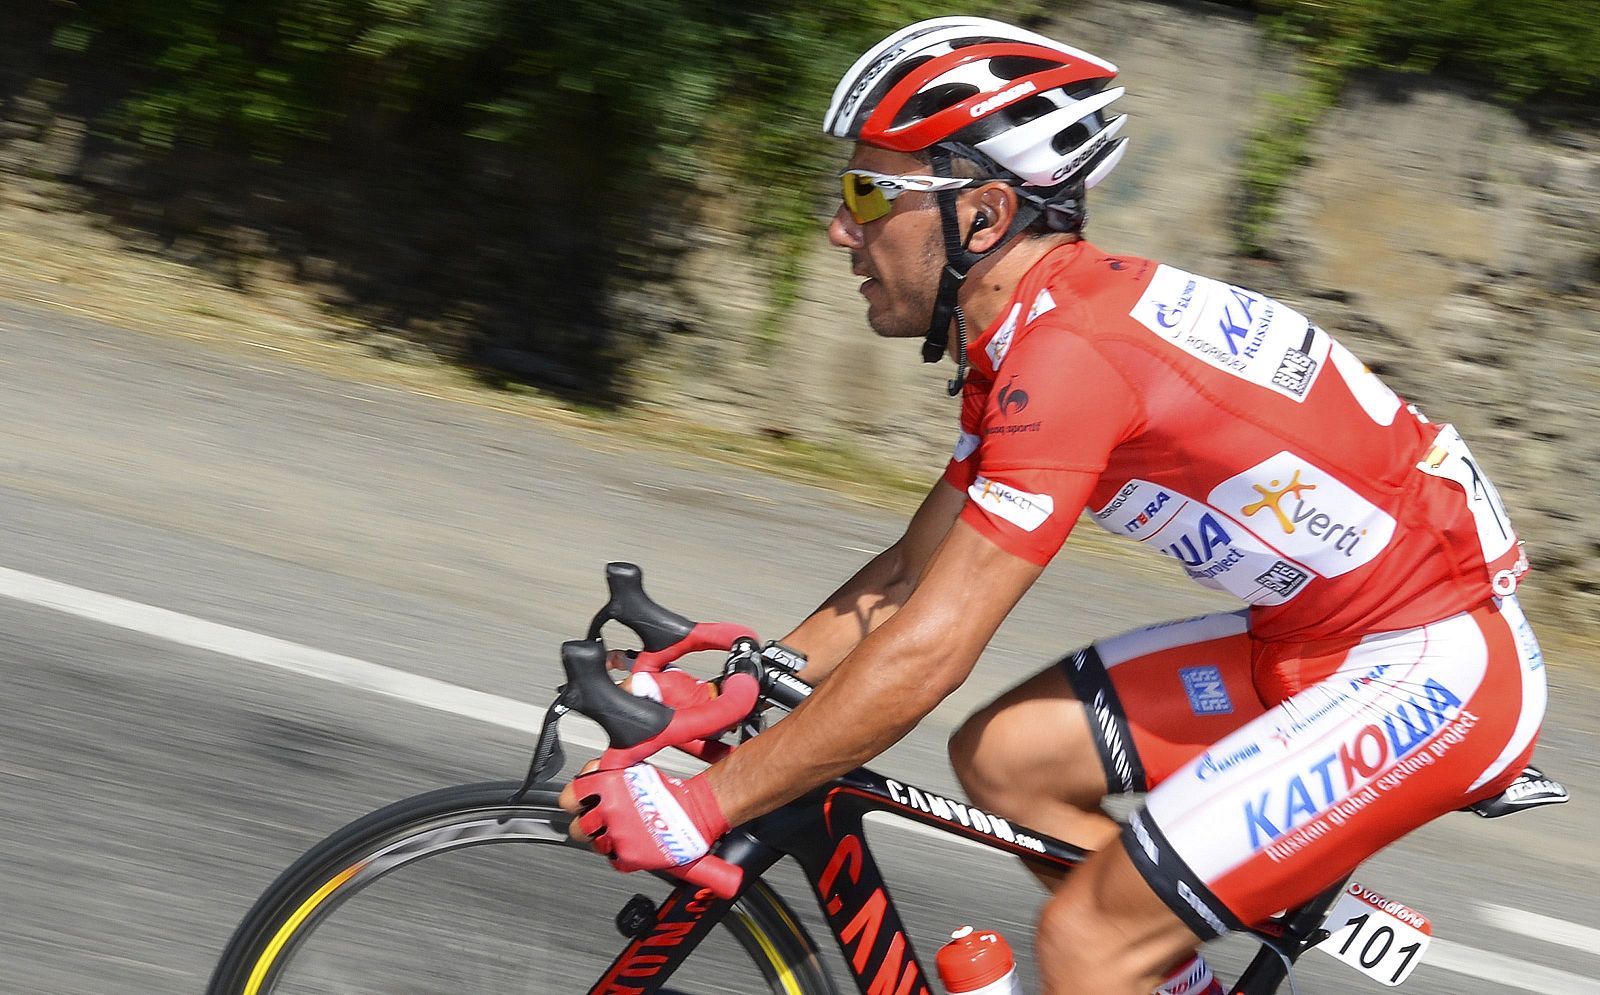 Katusha Team's Joaquin "Purito" Rodriguez of Spain cycles during the ninth stage of the Tour of Spain "La Vuelta" cycling race between Andorra and Barcelona